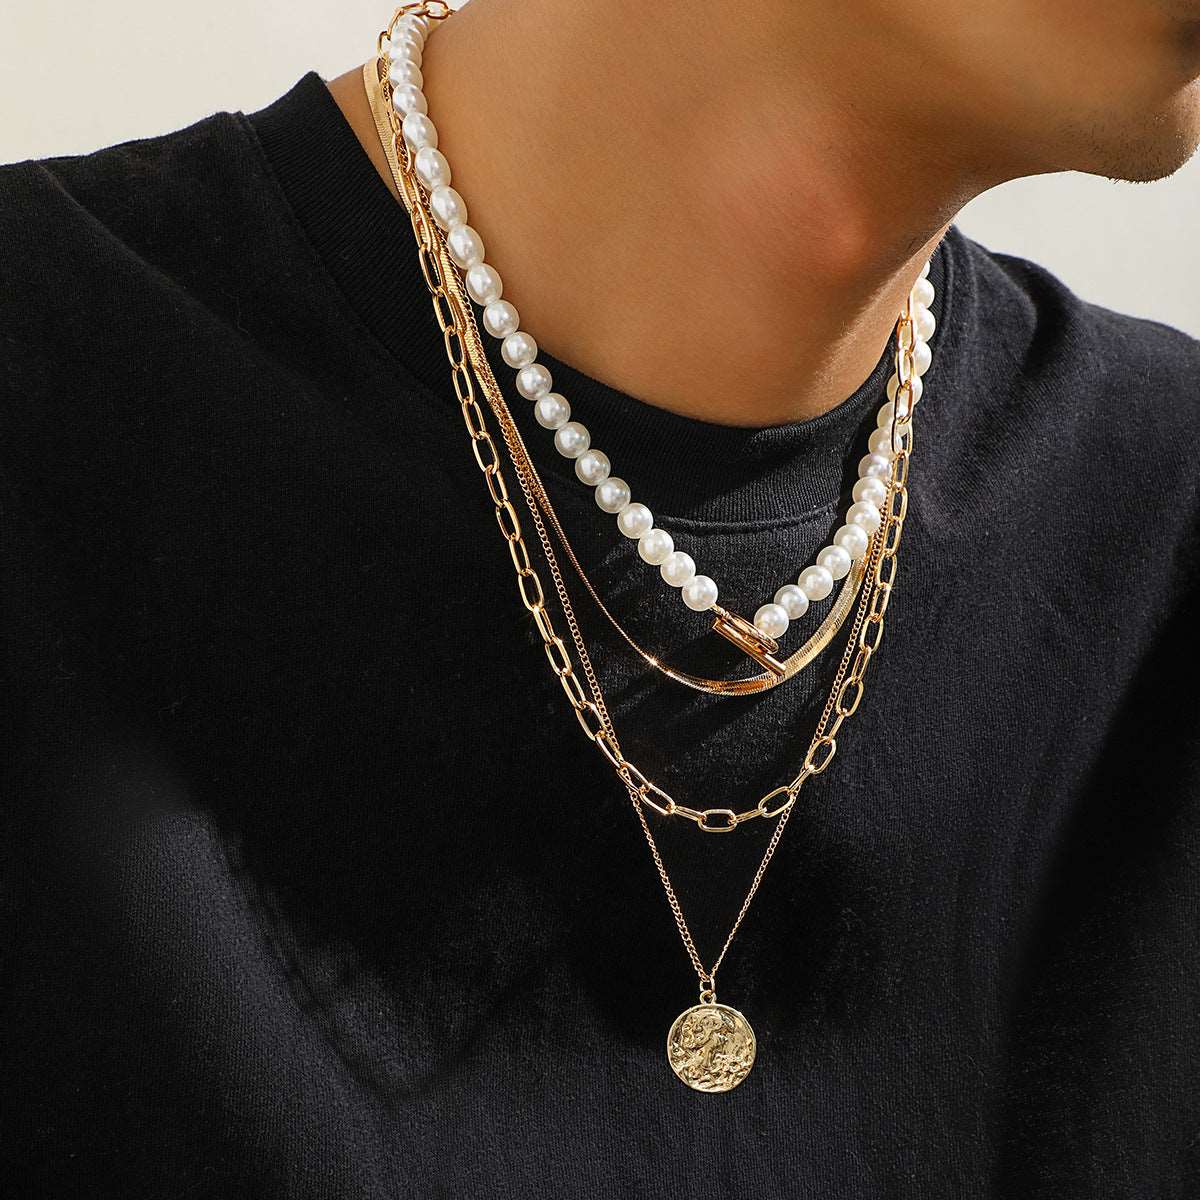 Men's Stitching Pearl Necklace